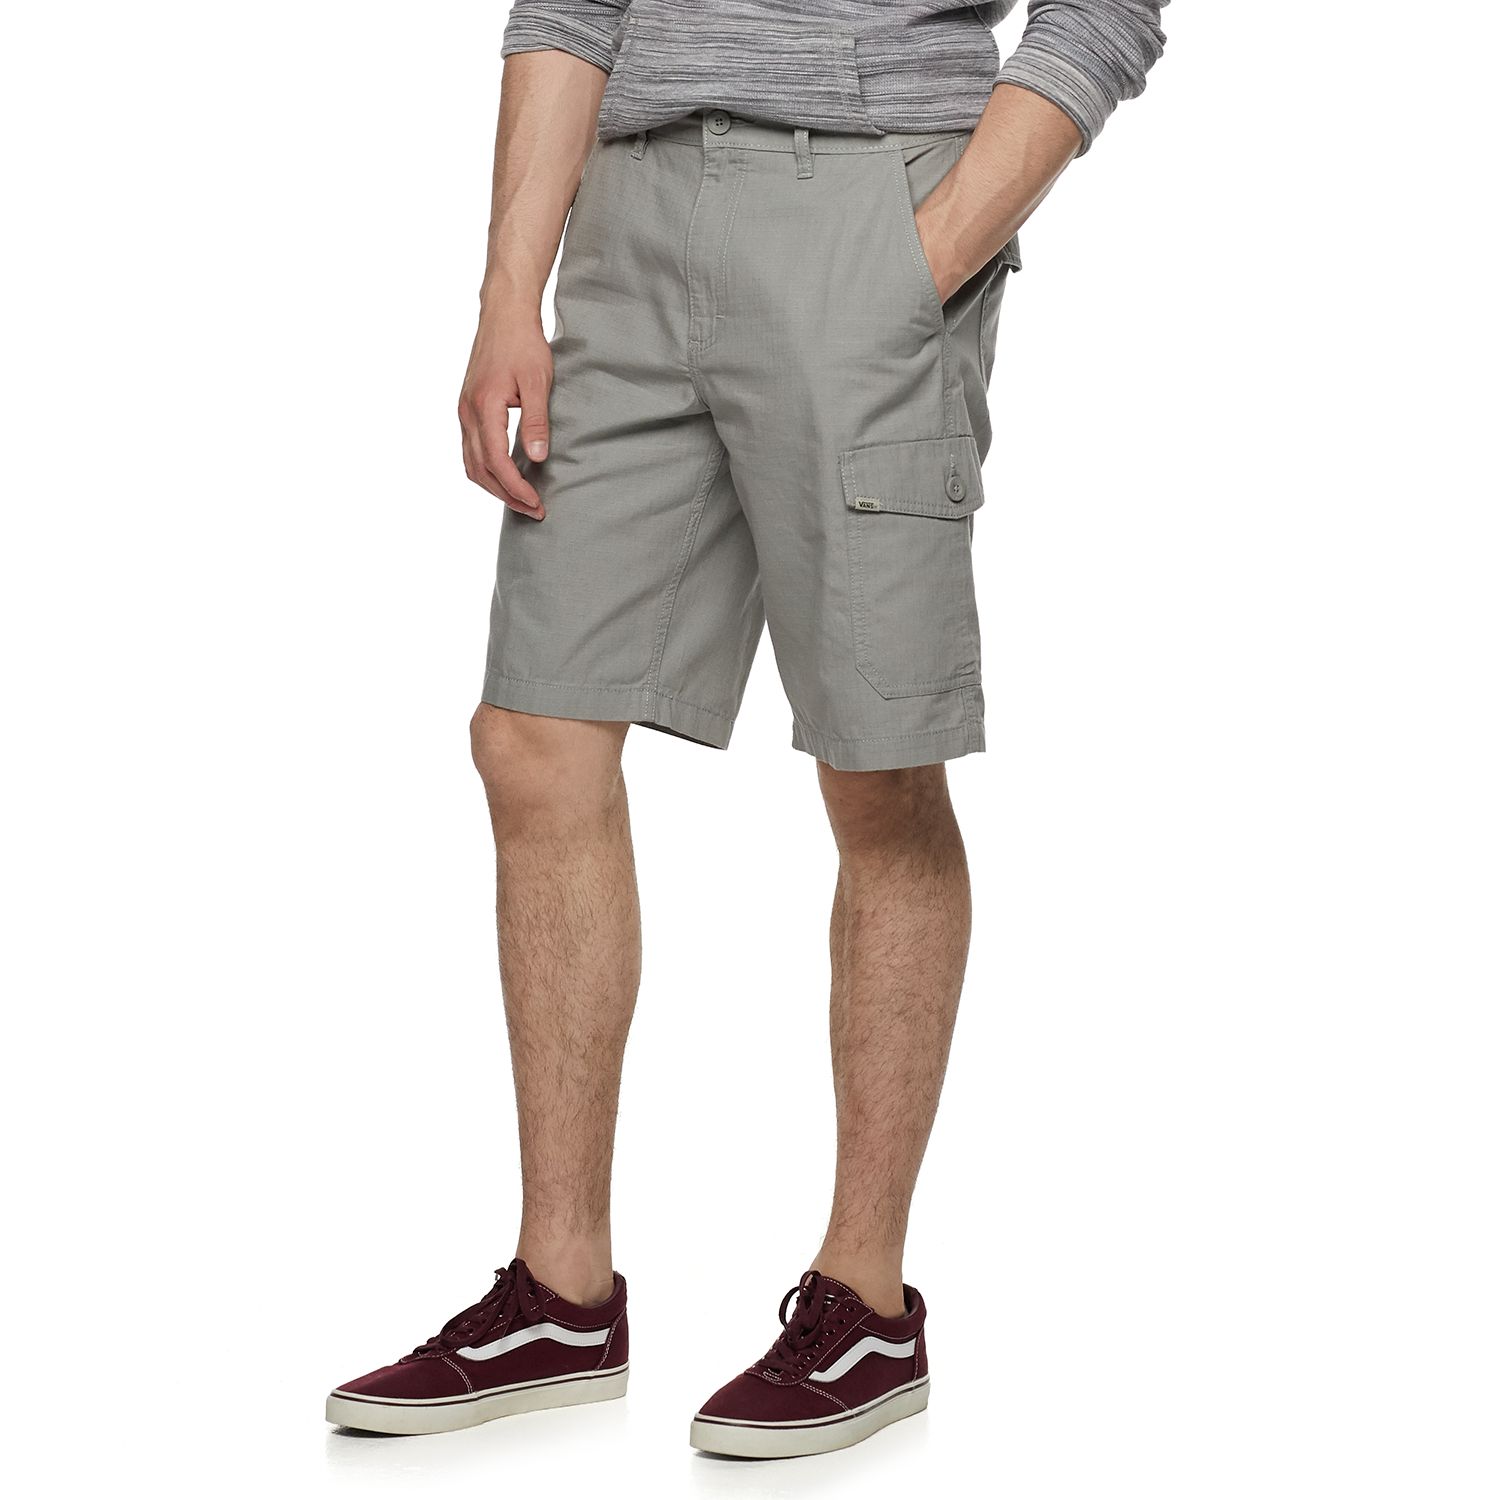 vans with cargo shorts